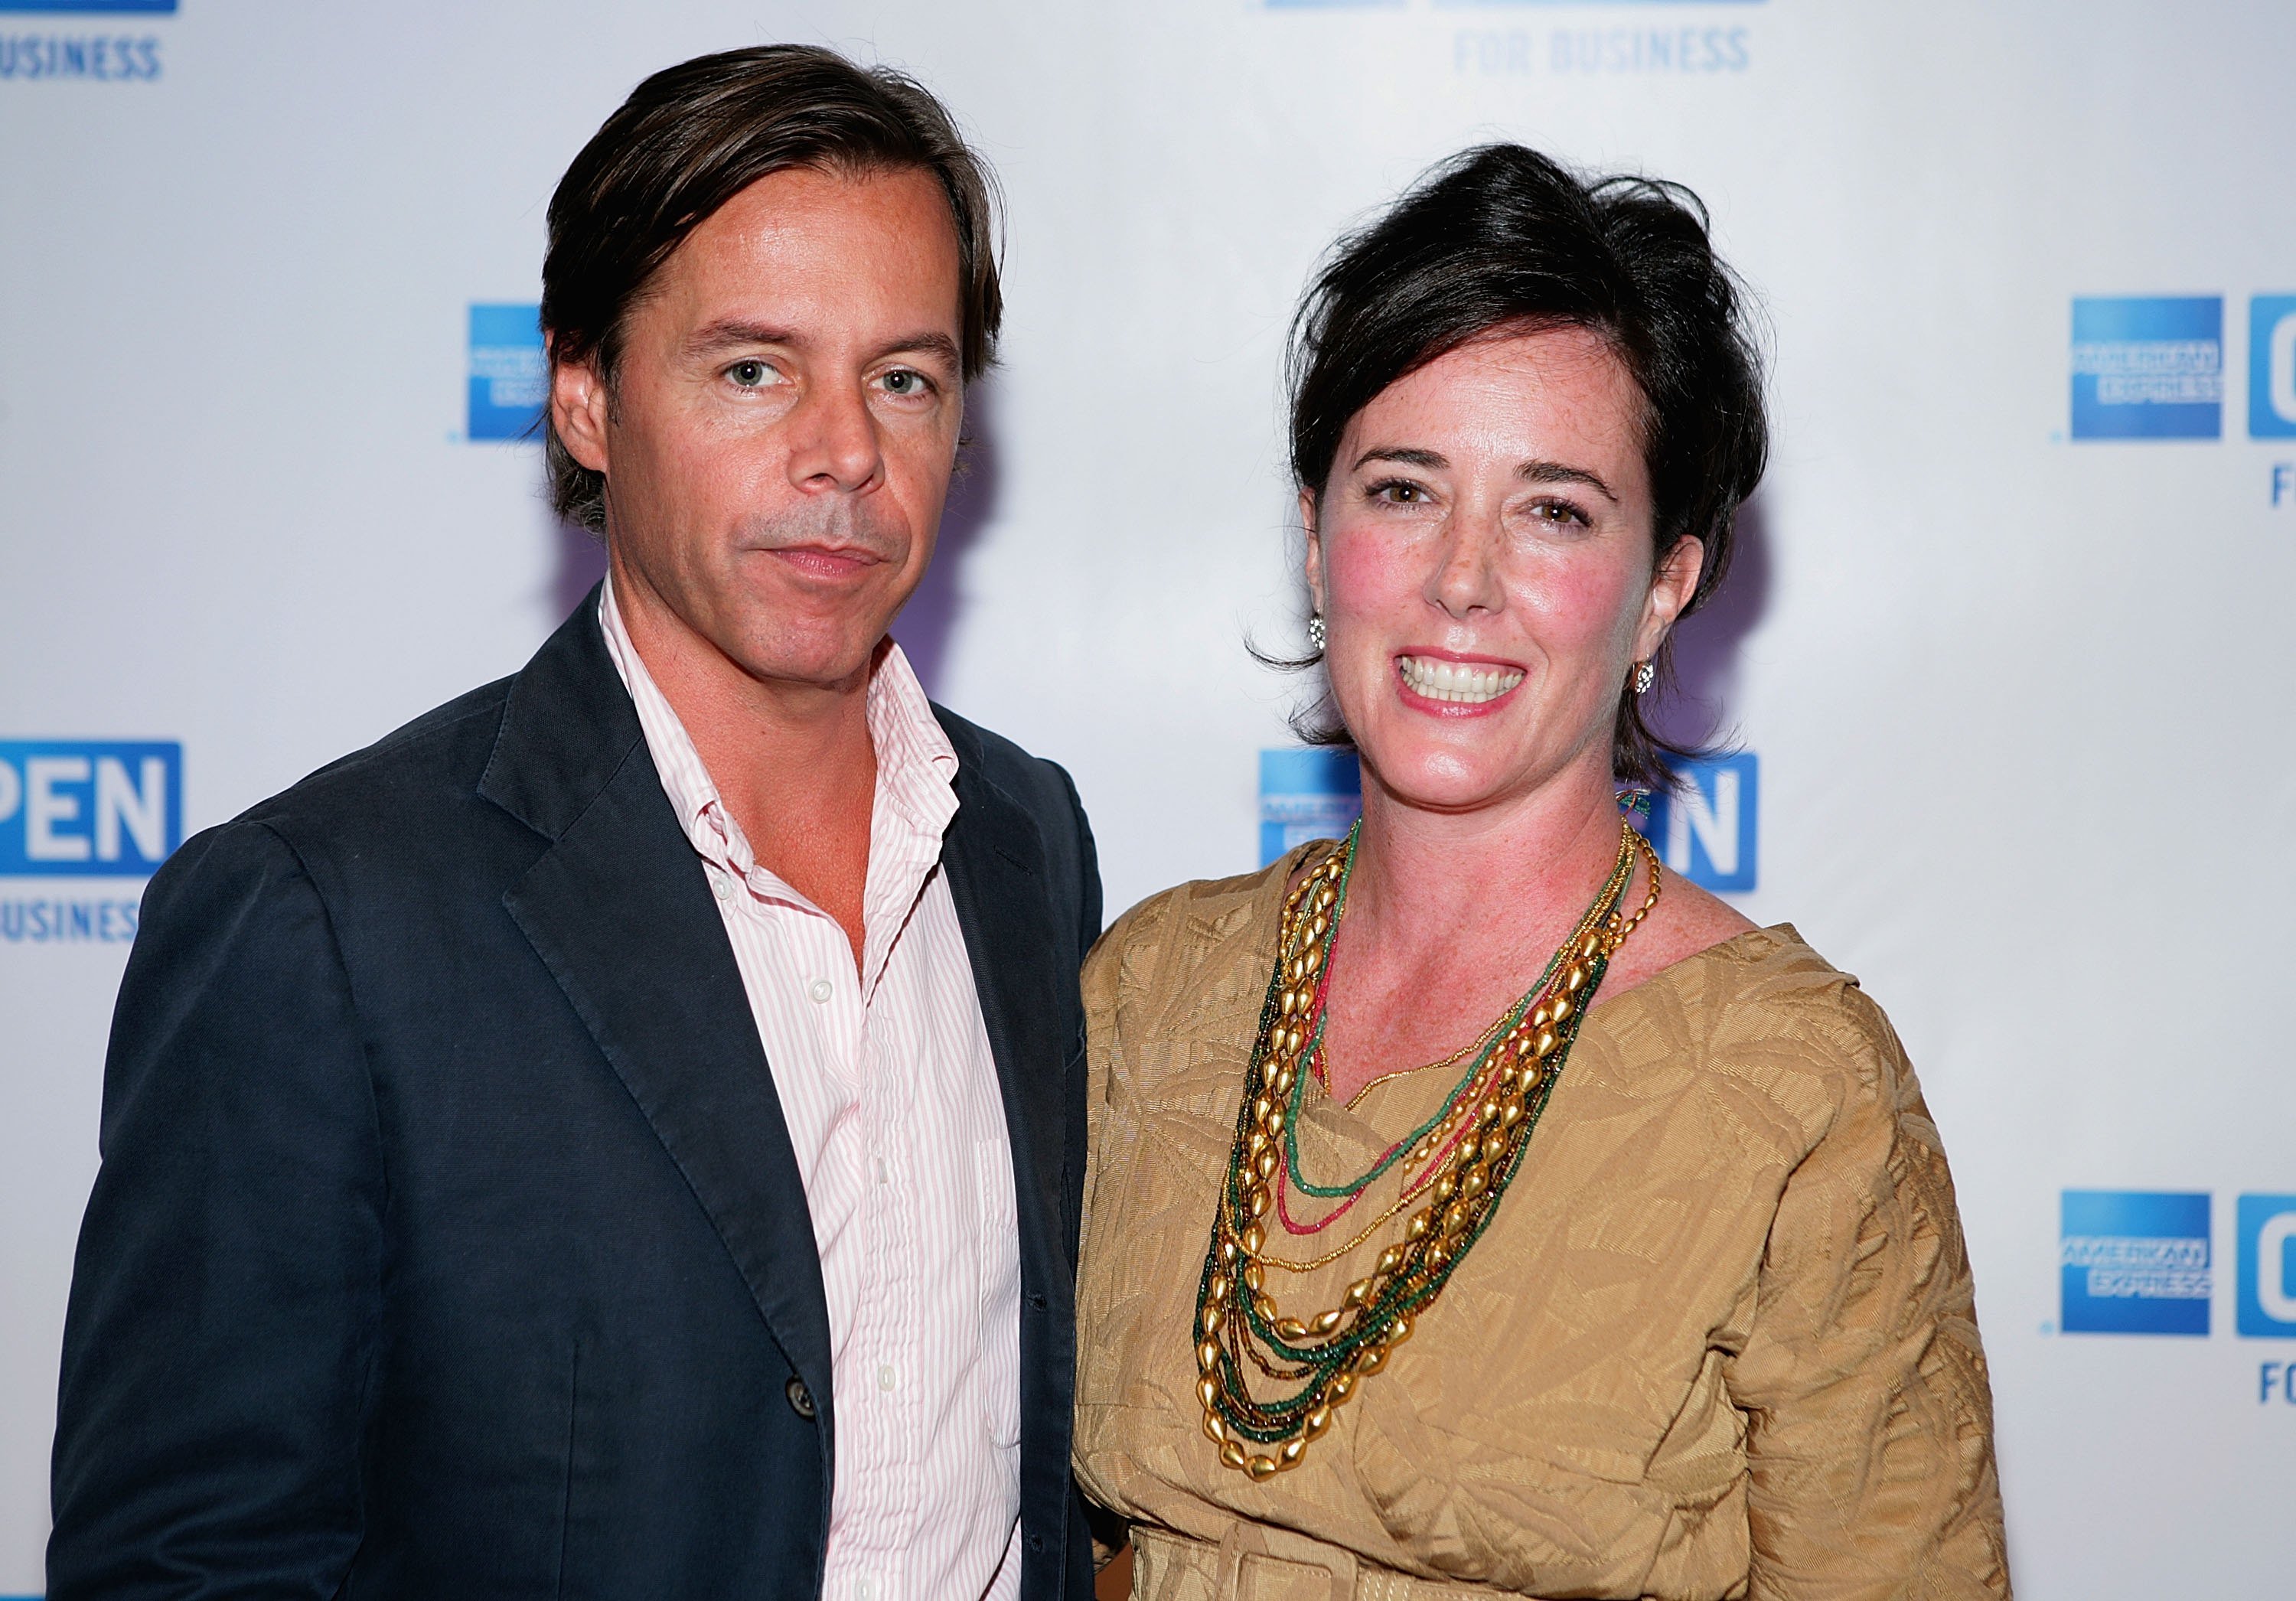 Andy Spade and Kate Spade attend American Express' "Making a Name for Yourself" at Nokia Theater July 27, 2006. | Photo: GettyImages 